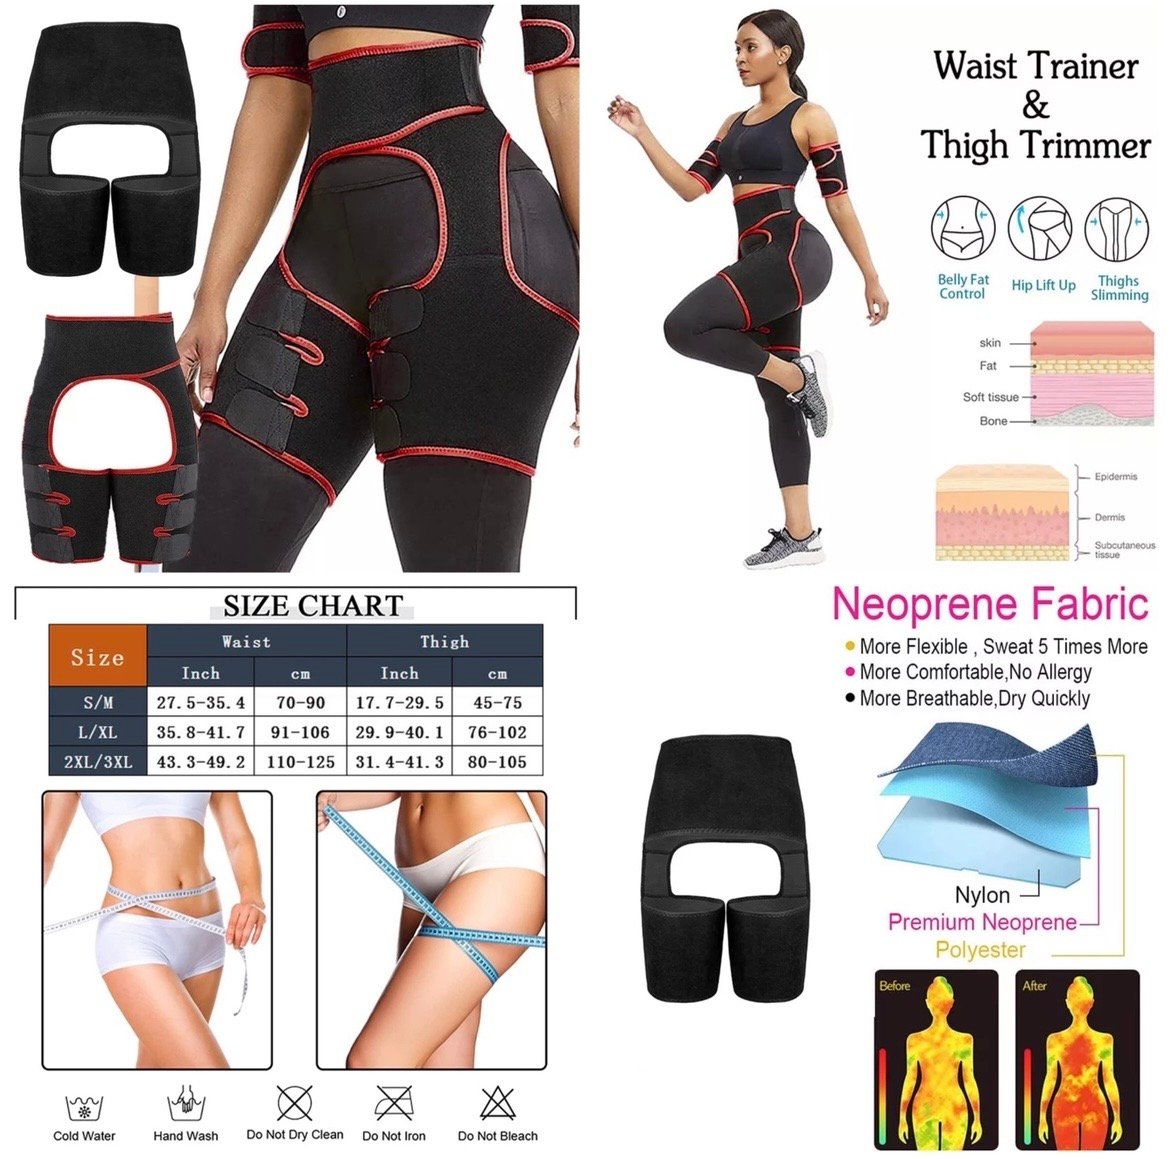 https://assets.bigcartel.com/product_images/88bb7a8d-4db8-4319-8562-9fcd9781f398/waist-trainer-for-women-3-in-1-waist-thigh-trainer-butt-lifter-workout-sweat-band.jpg?auto=format&fit=max&h=1200&w=1200